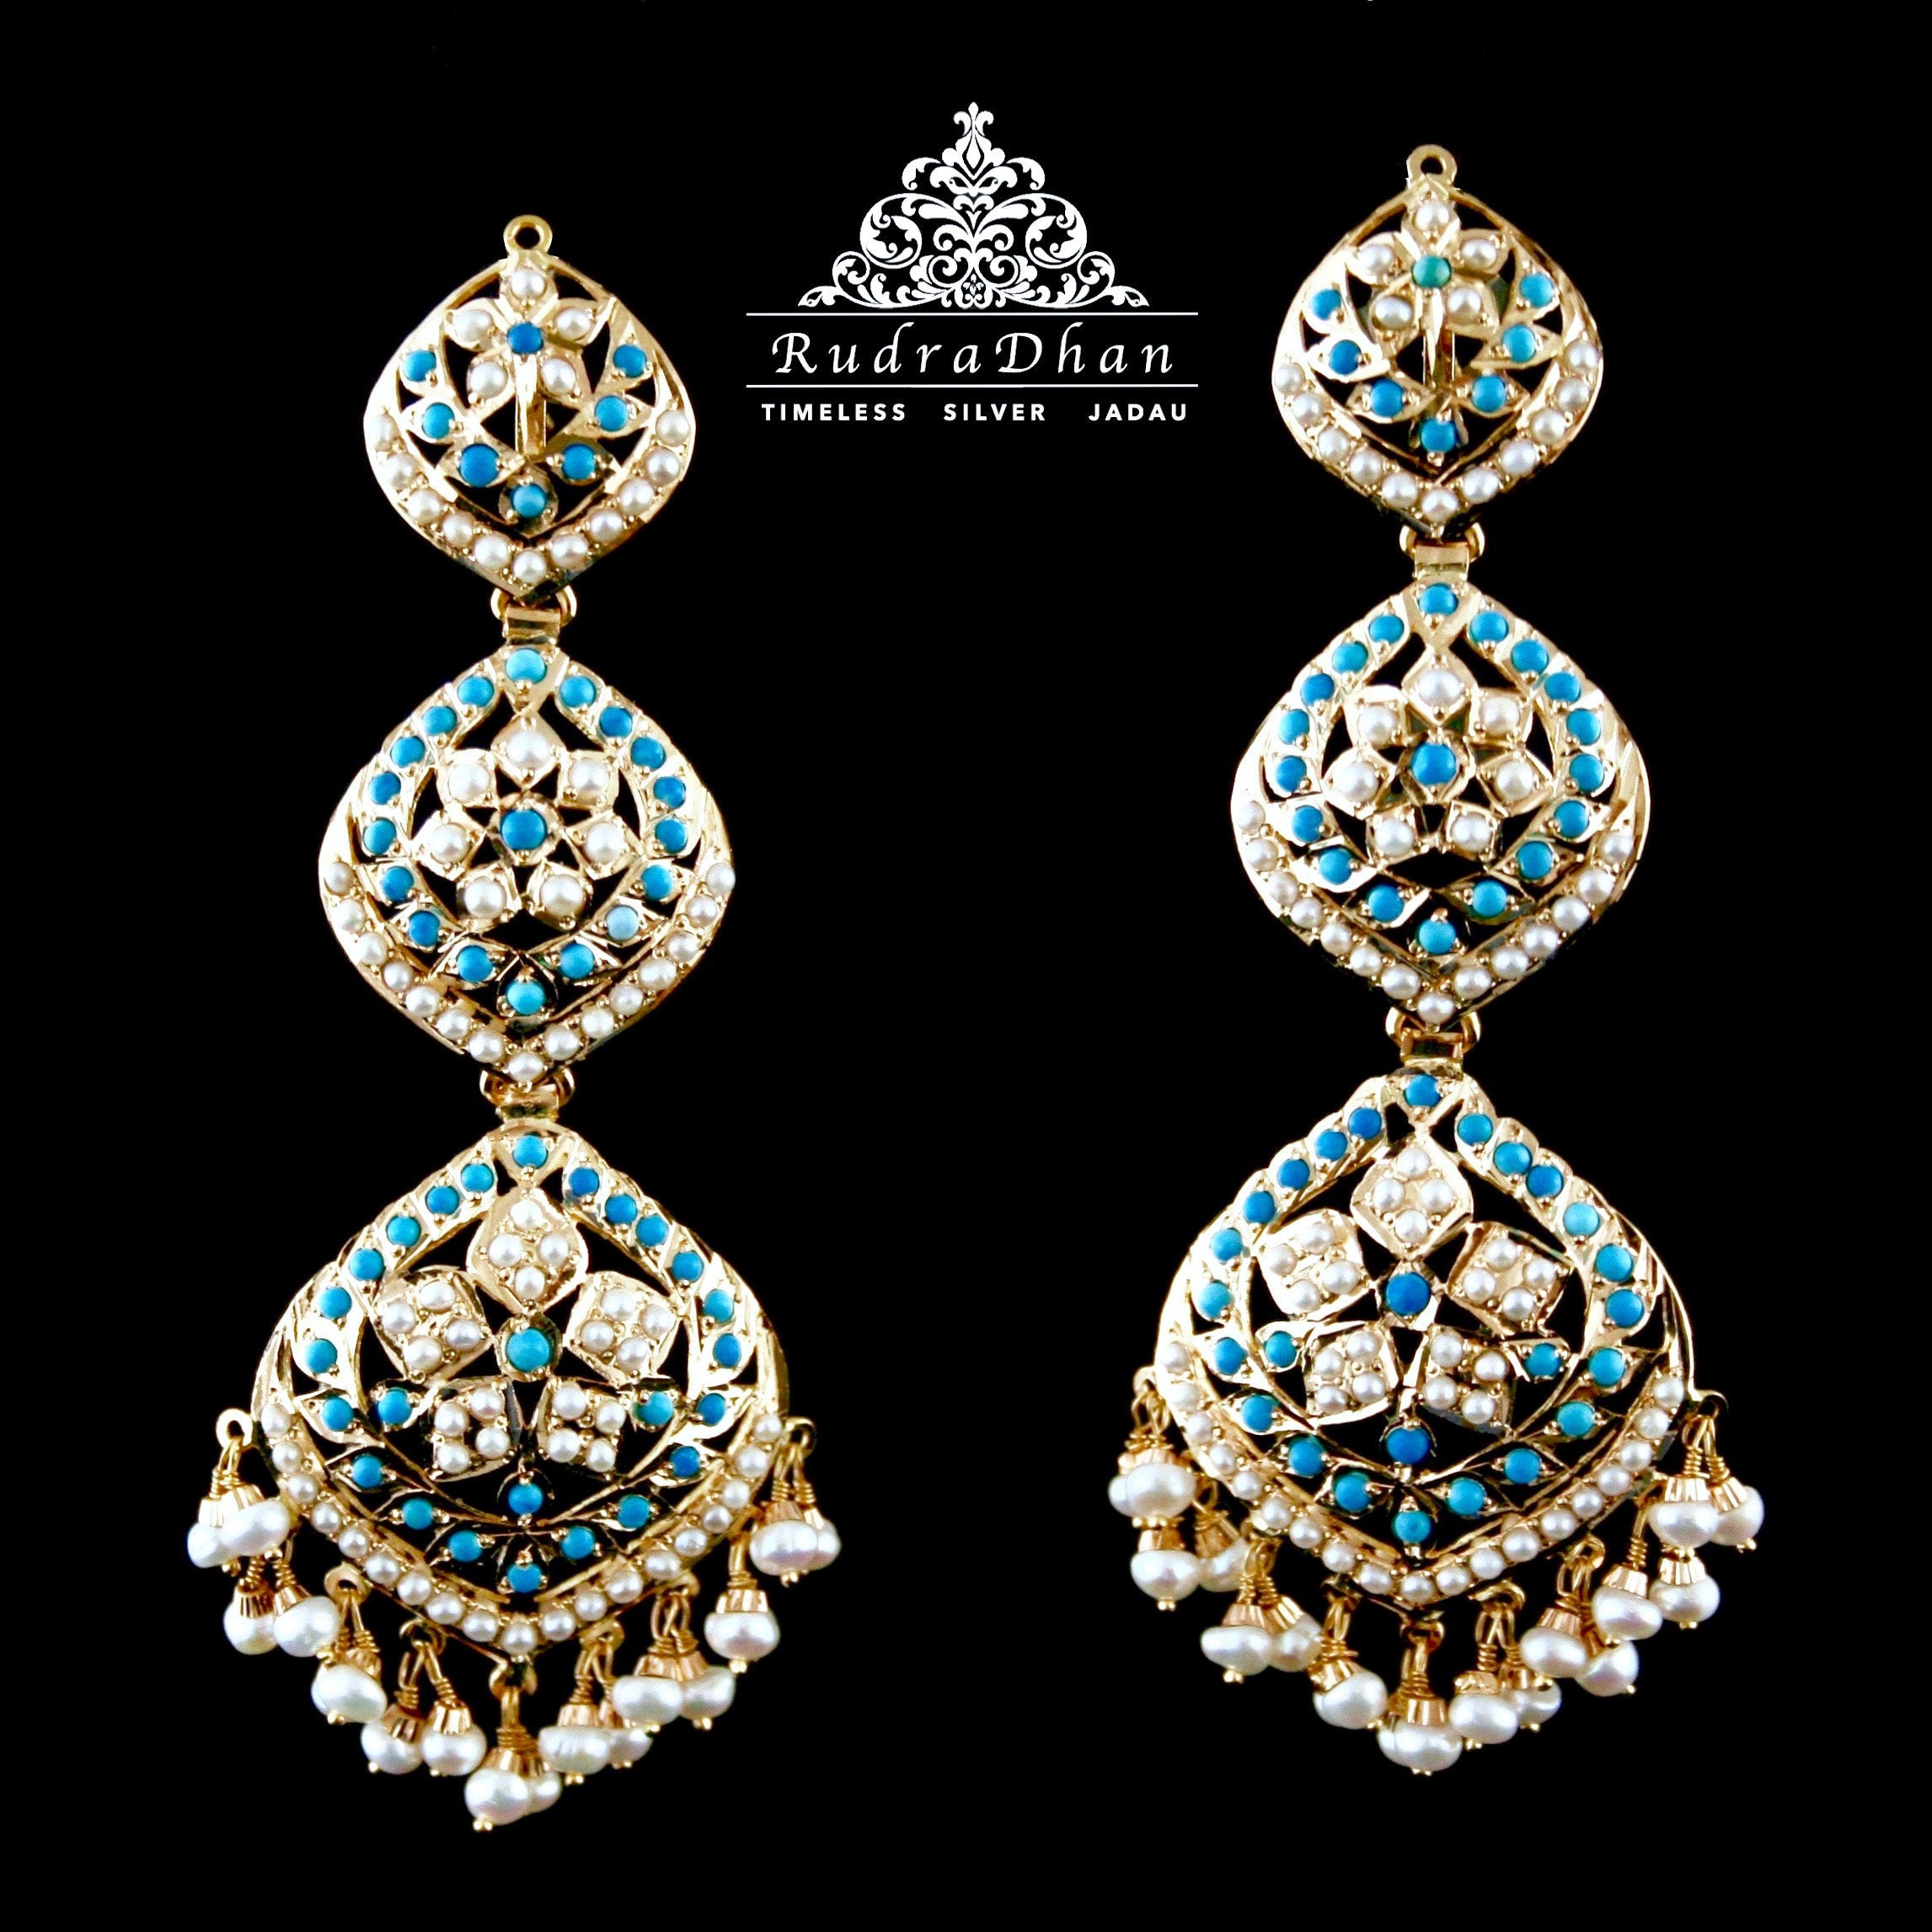 Pearl and Turquoise Earrings